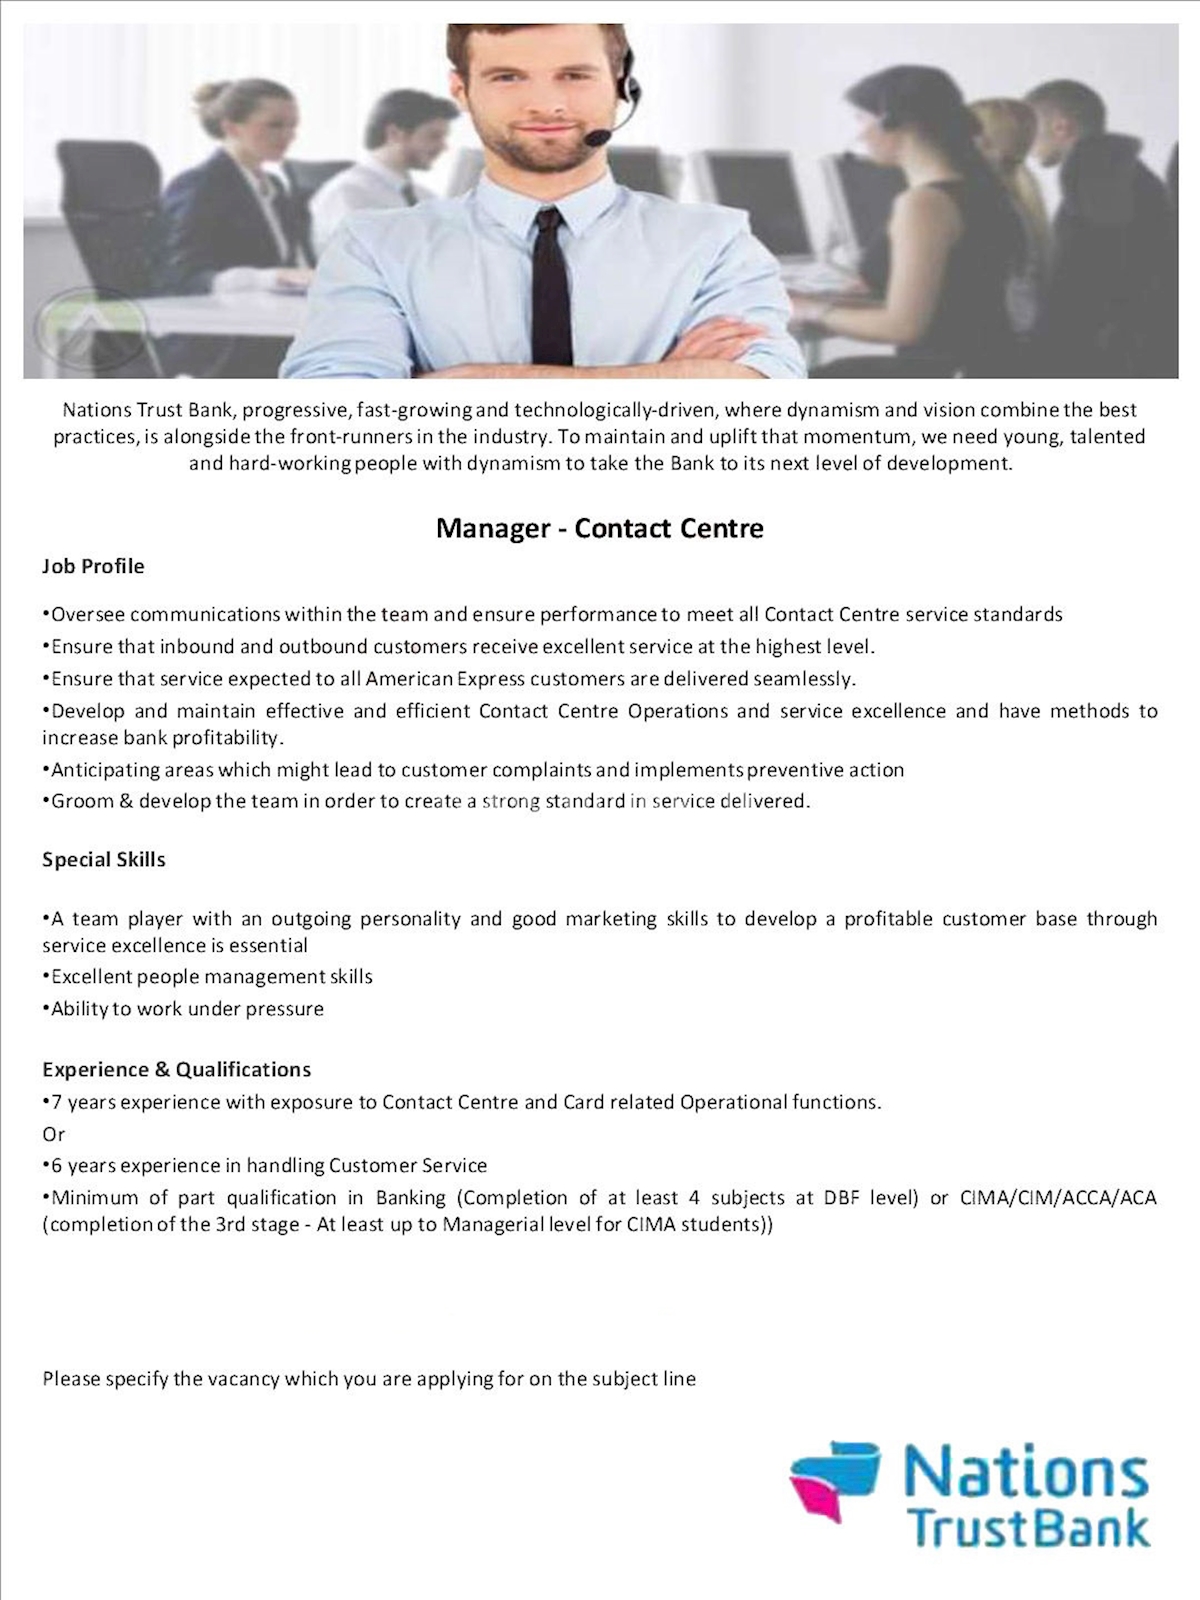 Manager - Contact Centre